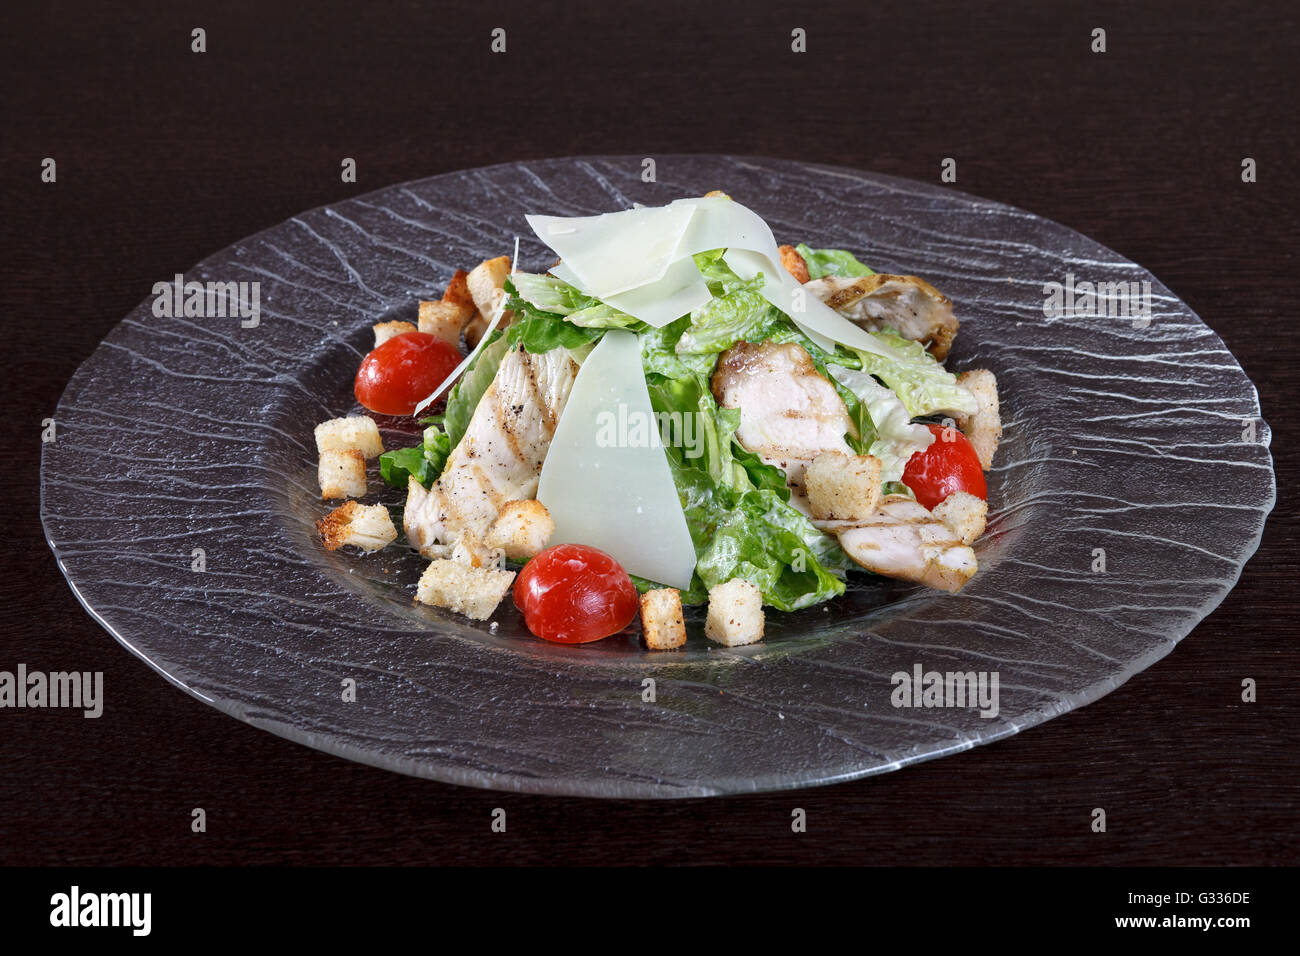 Salad with grilled chicken meat, lettuce, tomatoes and croutons. Dish of European cuisine. Glass plate on a brown wooden table.  Stock Photo